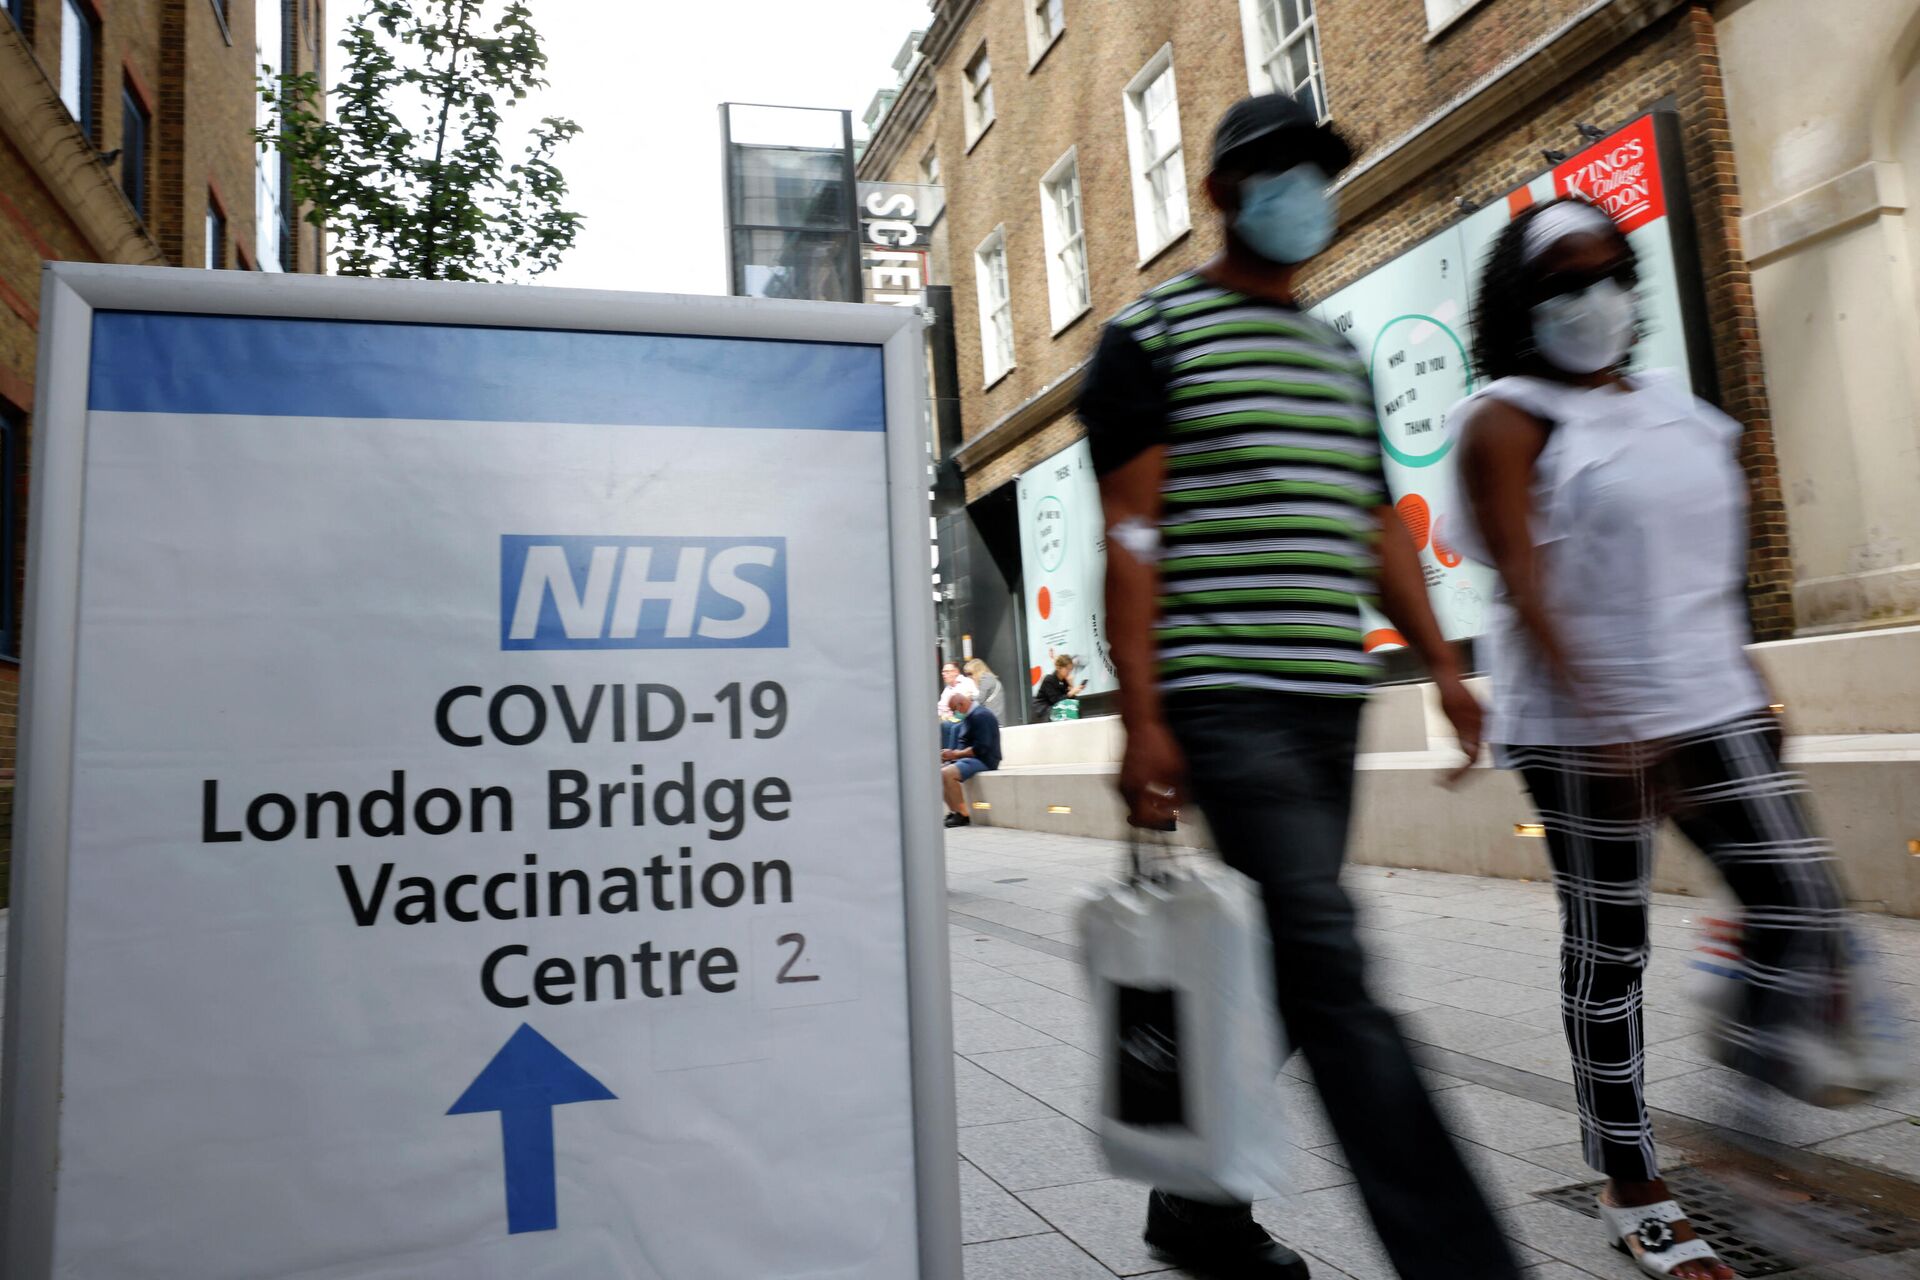 People pass signs indicating the entrance to the London Bridge Vaccination Centre in London on August 9, 2021 - Sputnik International, 1920, 22.10.2021